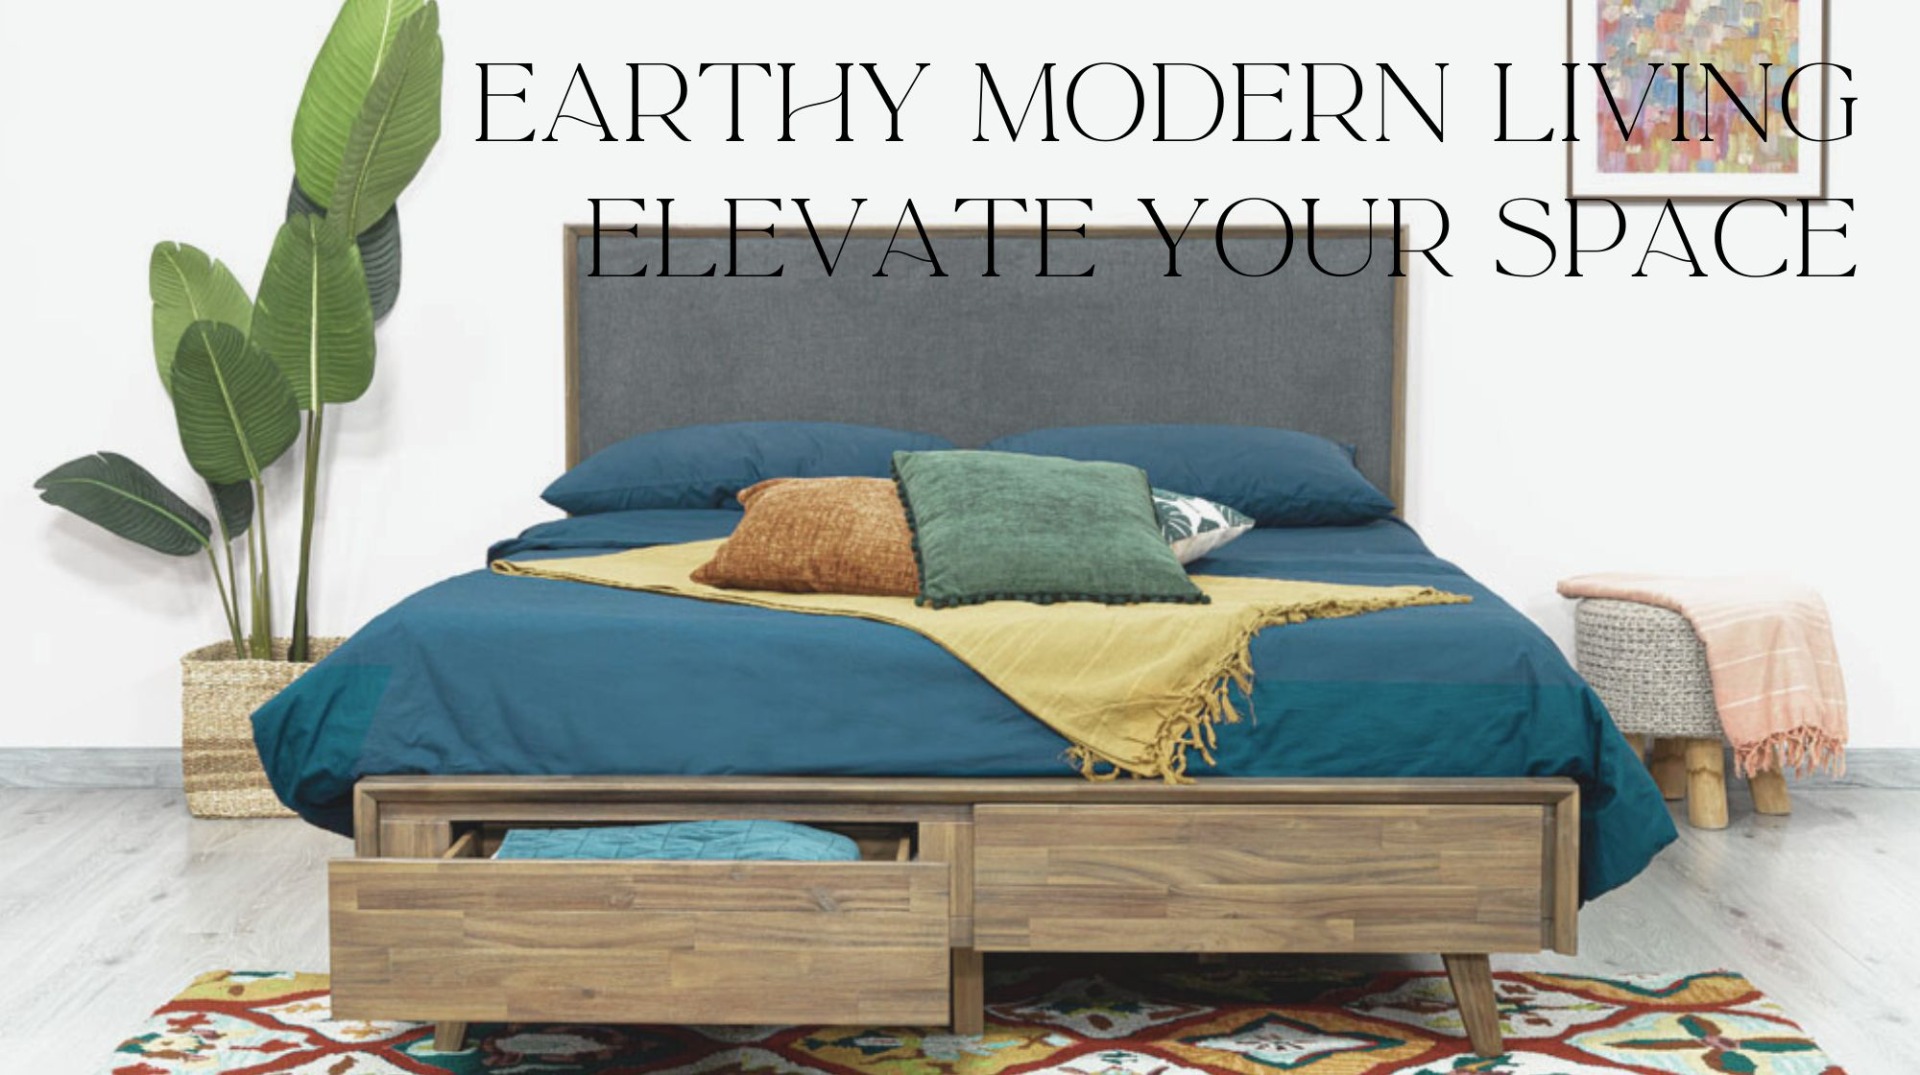 Earthy Modern Living Elevate Your Space